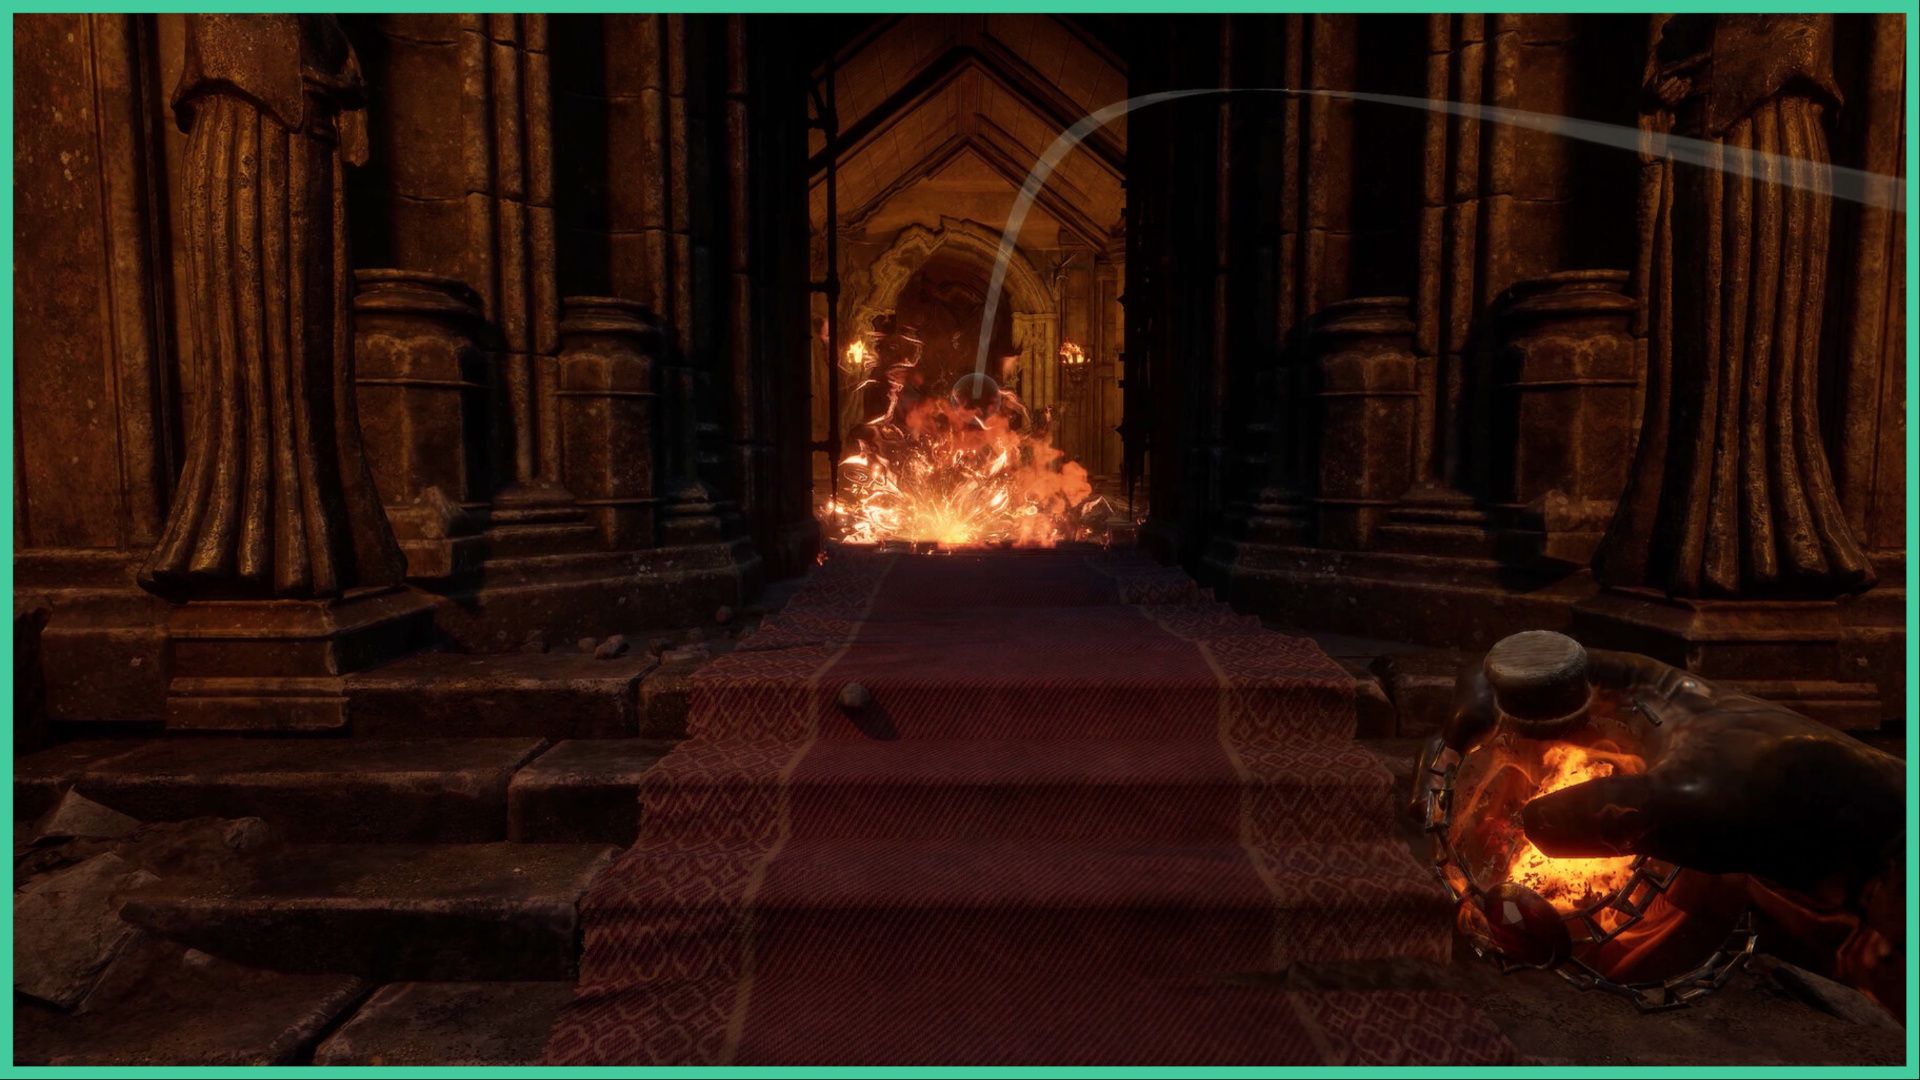 feature image for our dungeonborne bounty hunter guide, the image features a screenshot from the game of a set of steps adorned by a long carpet that lead to a hall that is on fire, there are stone statues on either side of the entrance, as the player holds a firey bomb in their hand